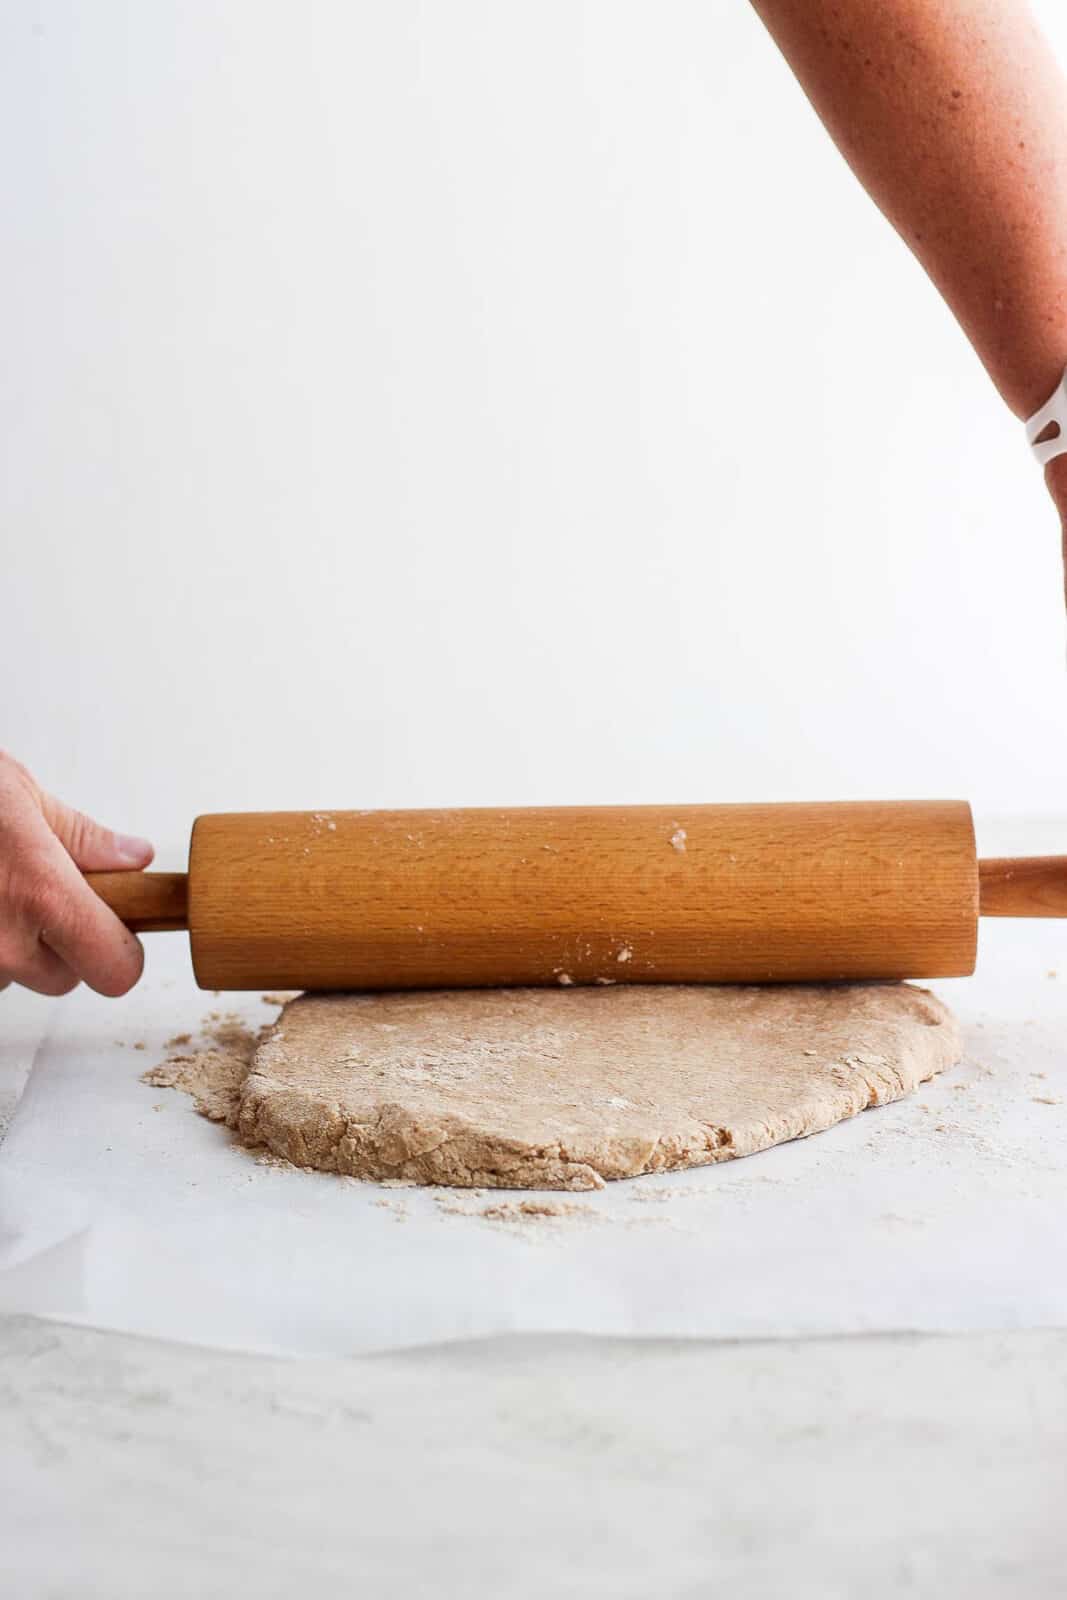 Shortcake dough being rolled out with a rolling pin.